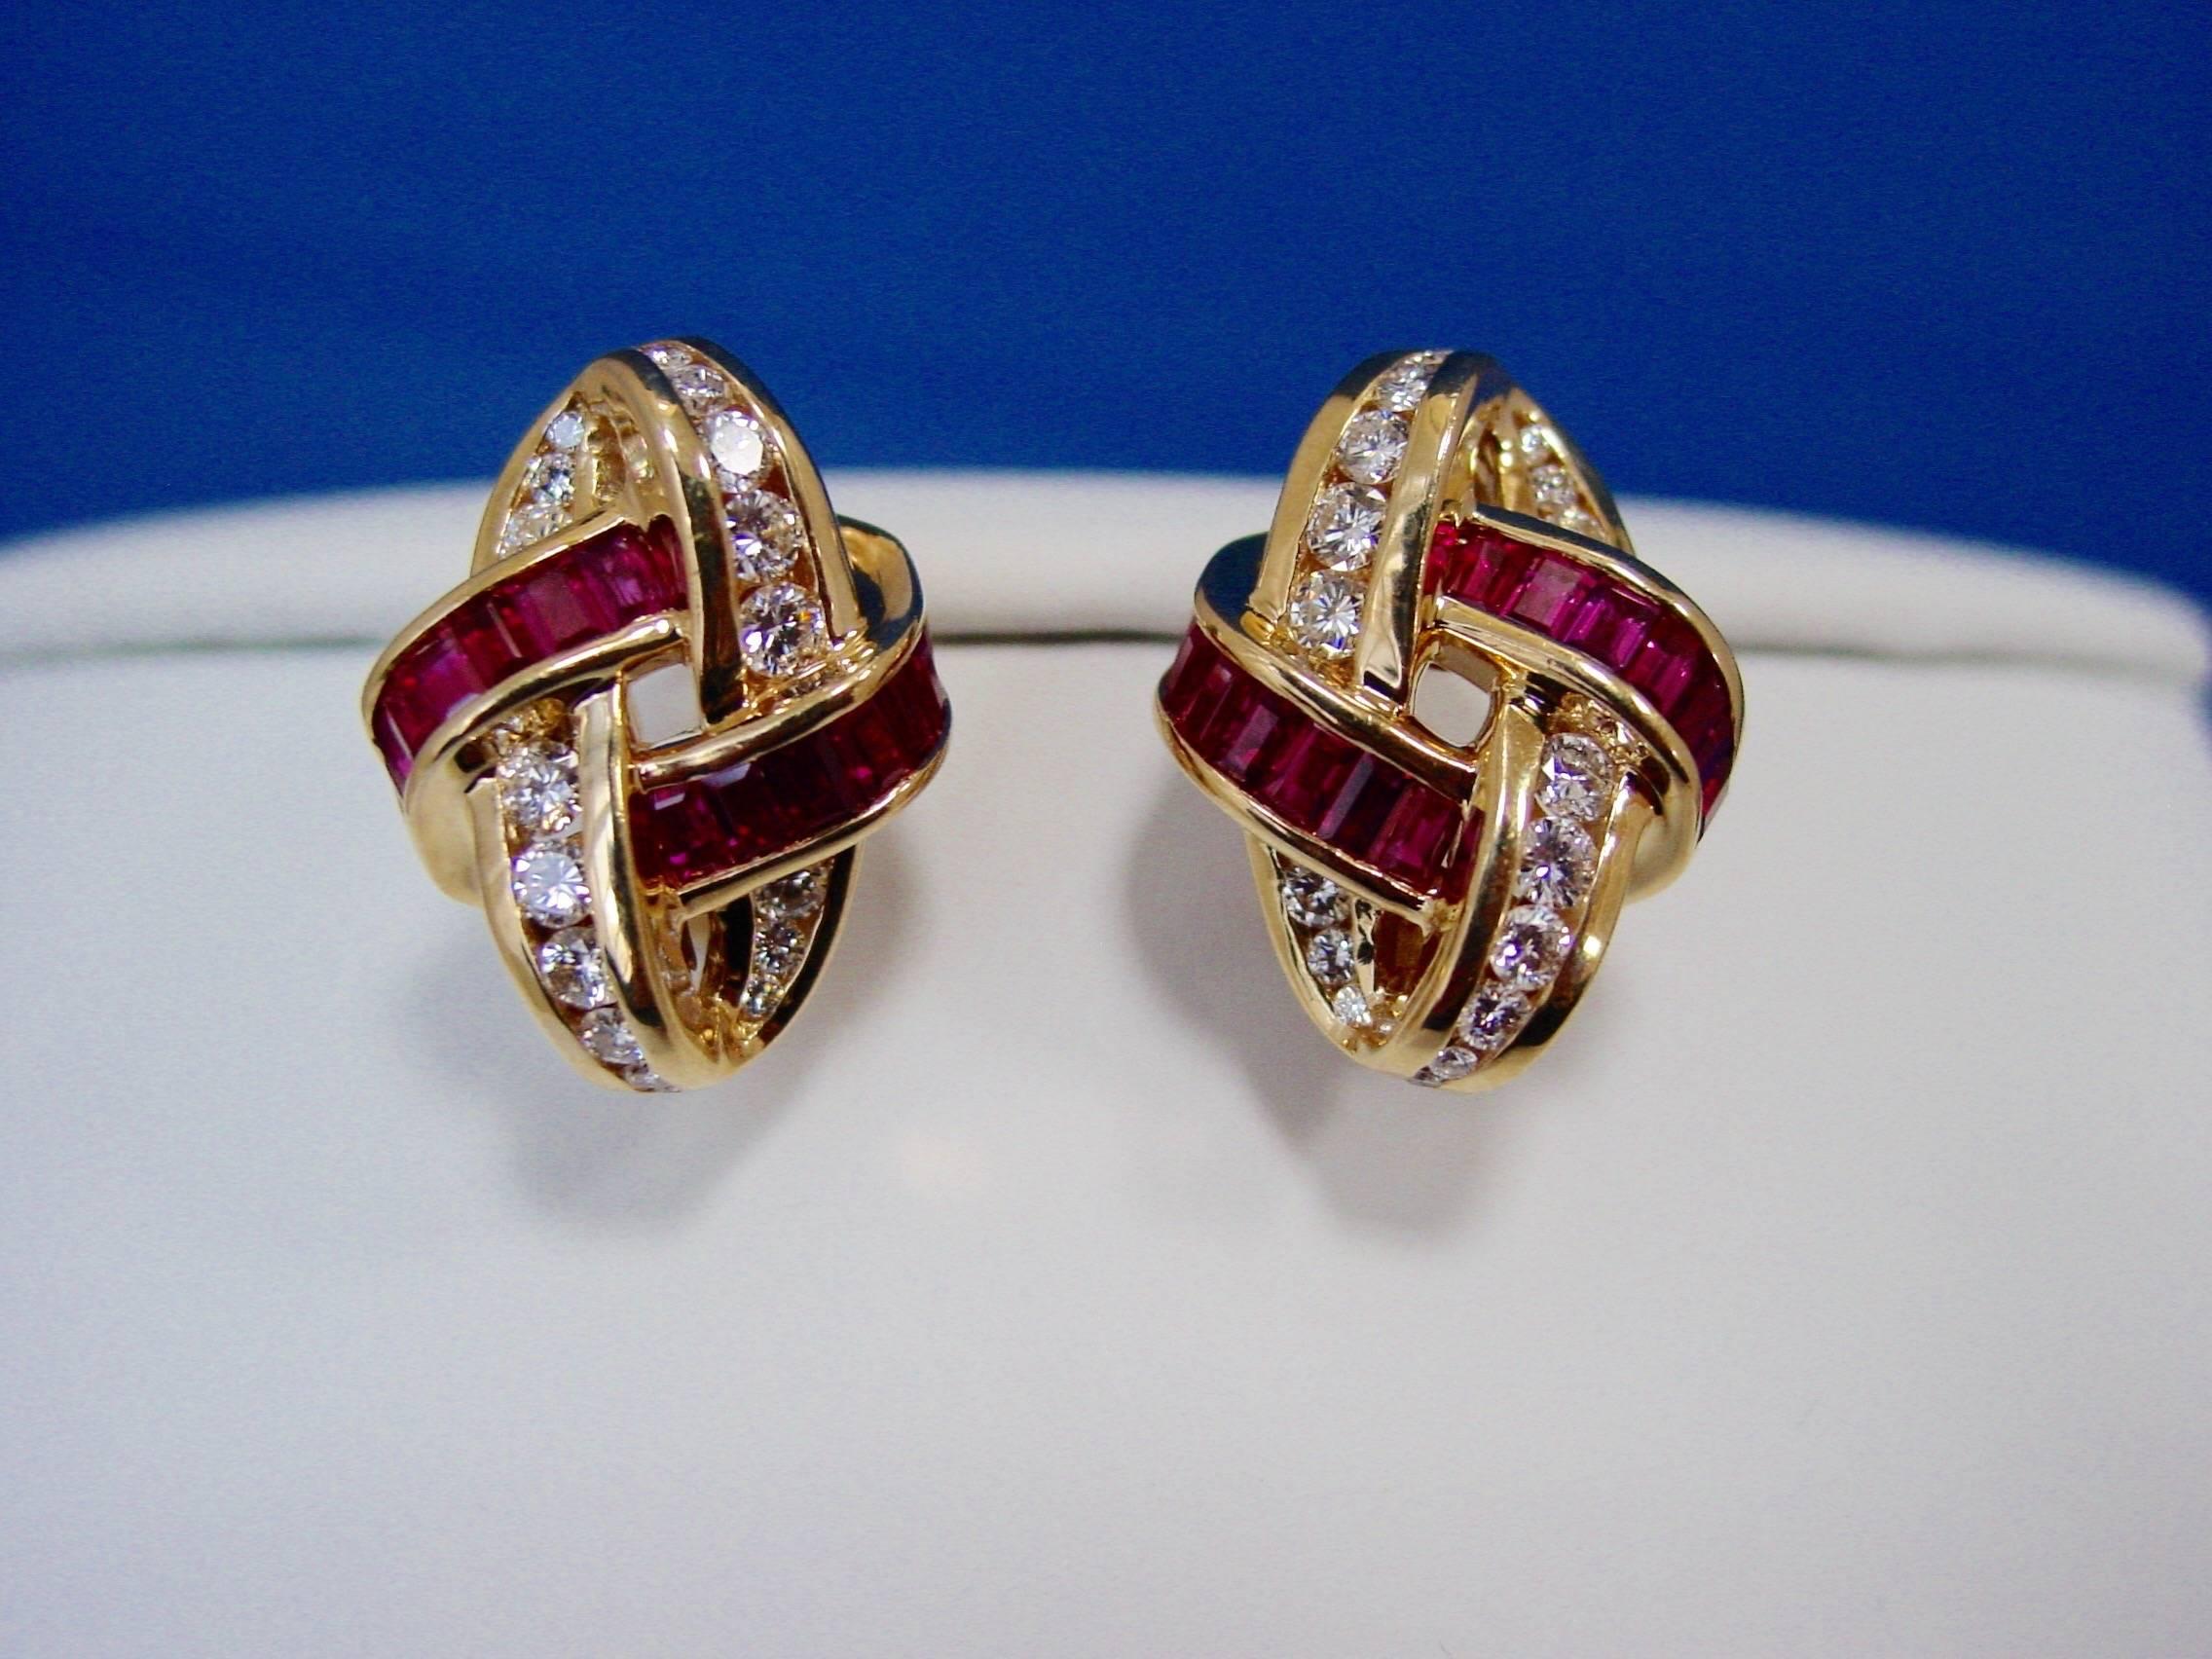 A Ruby and Diamond Brooch and Earring Set Mounted in 18 Karat Yellow Gold by Charles Krypell.  This beautifully made set features approximately 3.15  carats of channel set baguette rubies and approximately 2.35 carats of round brilliant diamonds,